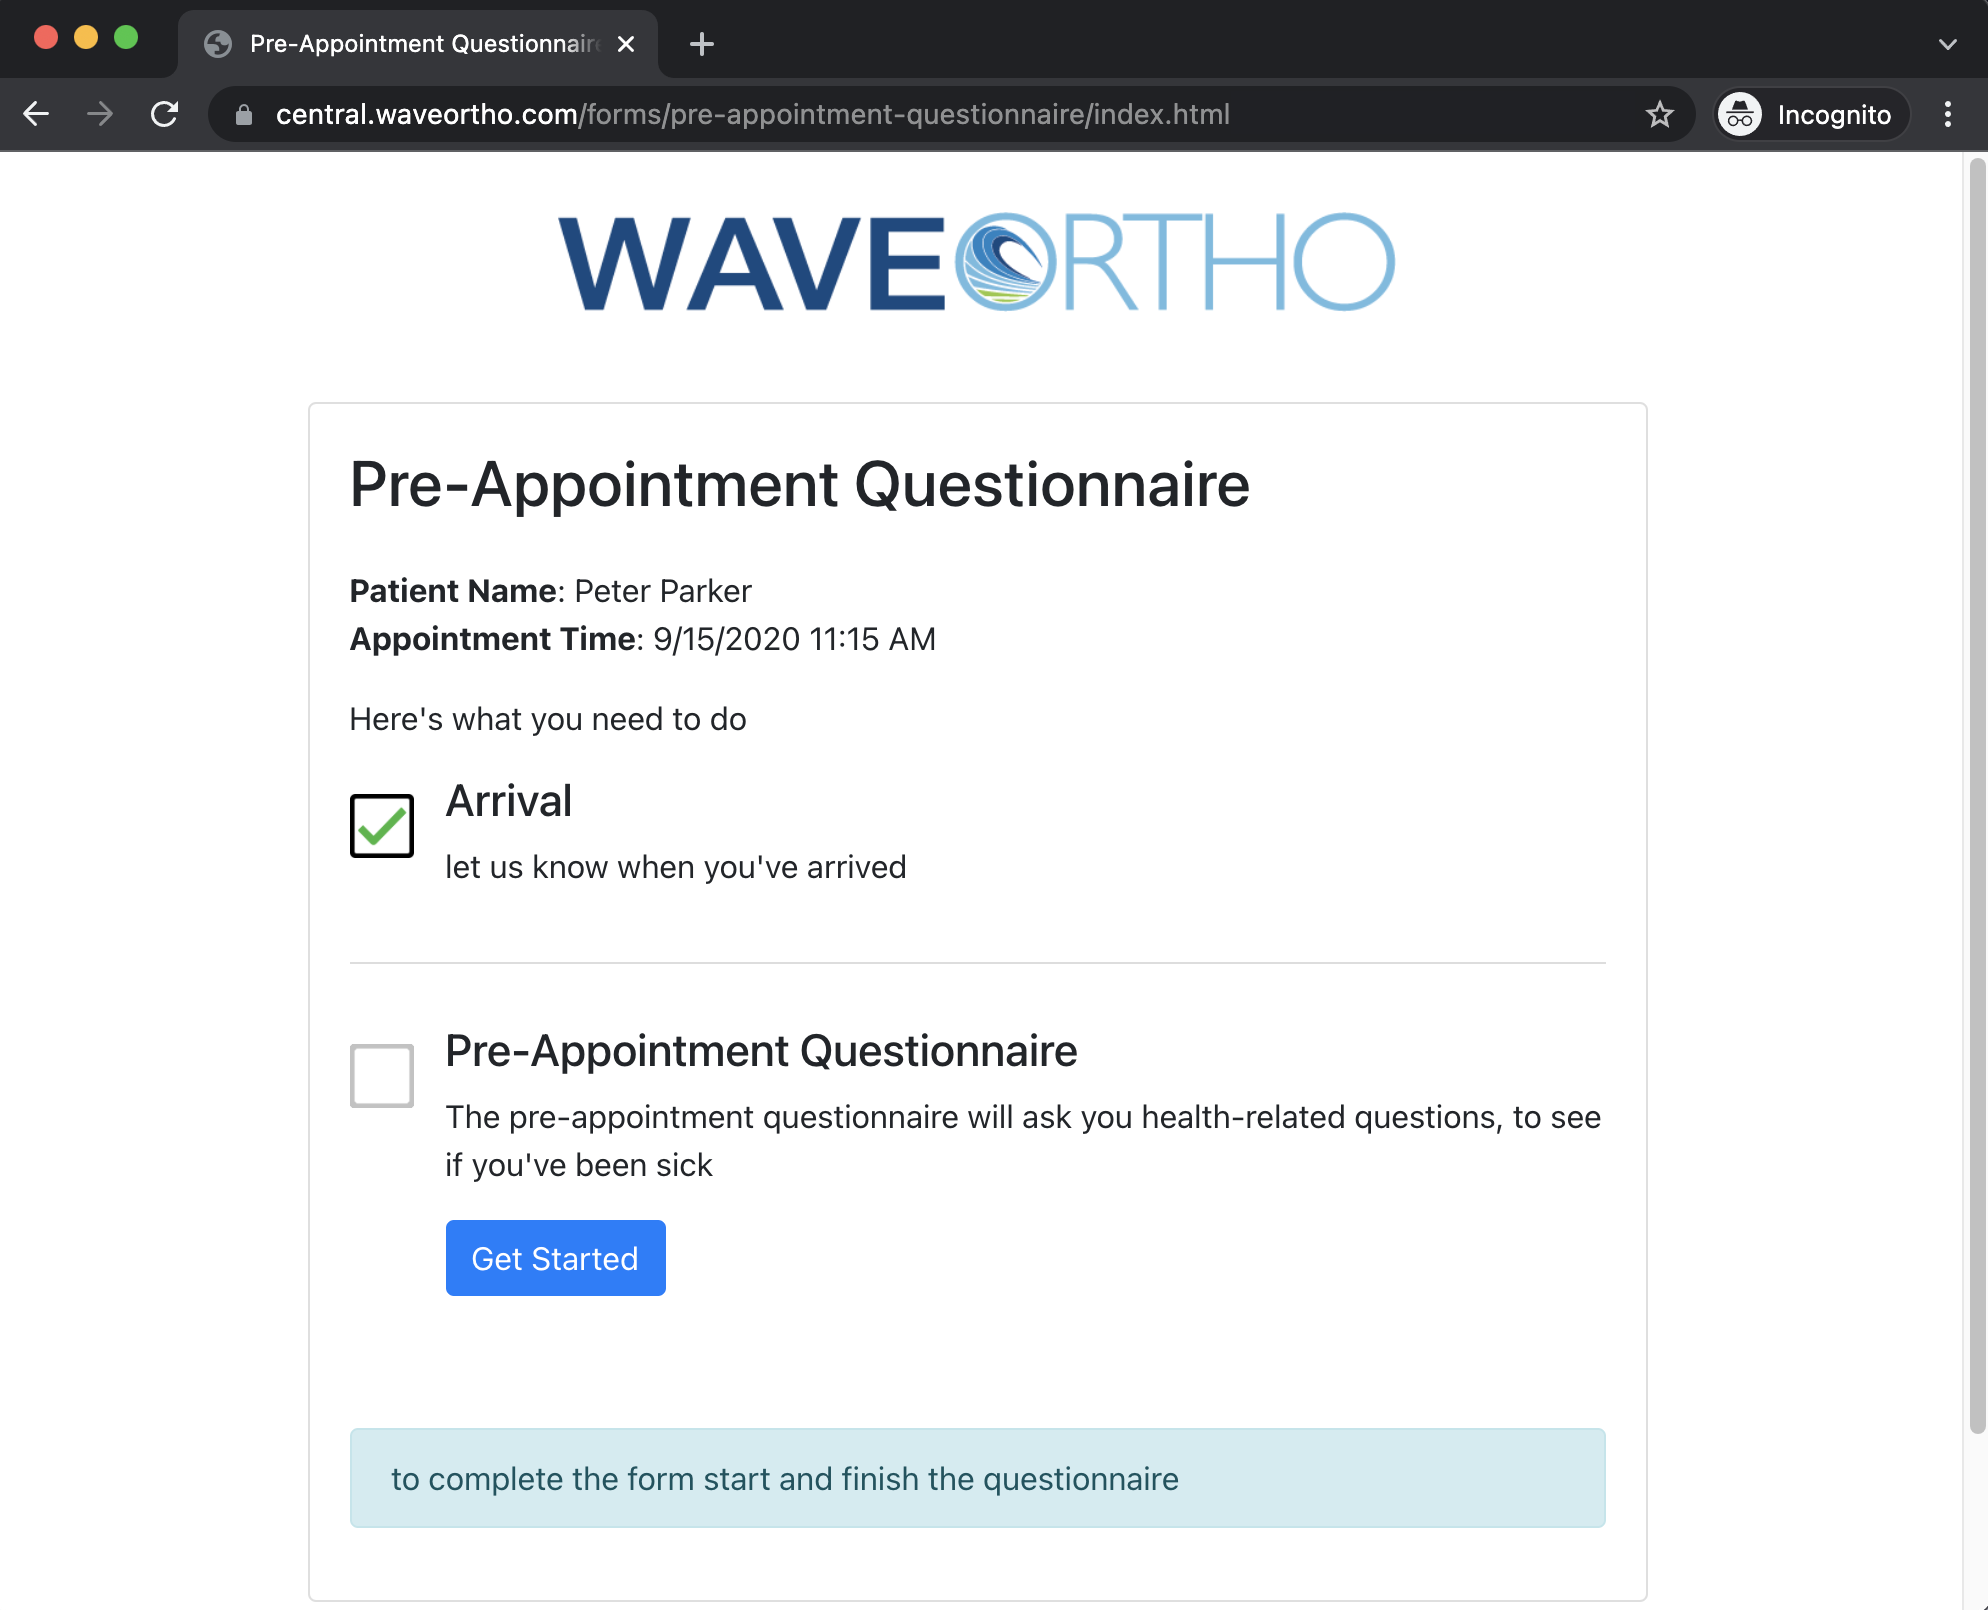 A screenshot of the pre-appointment questionnaire open in Google Chrome